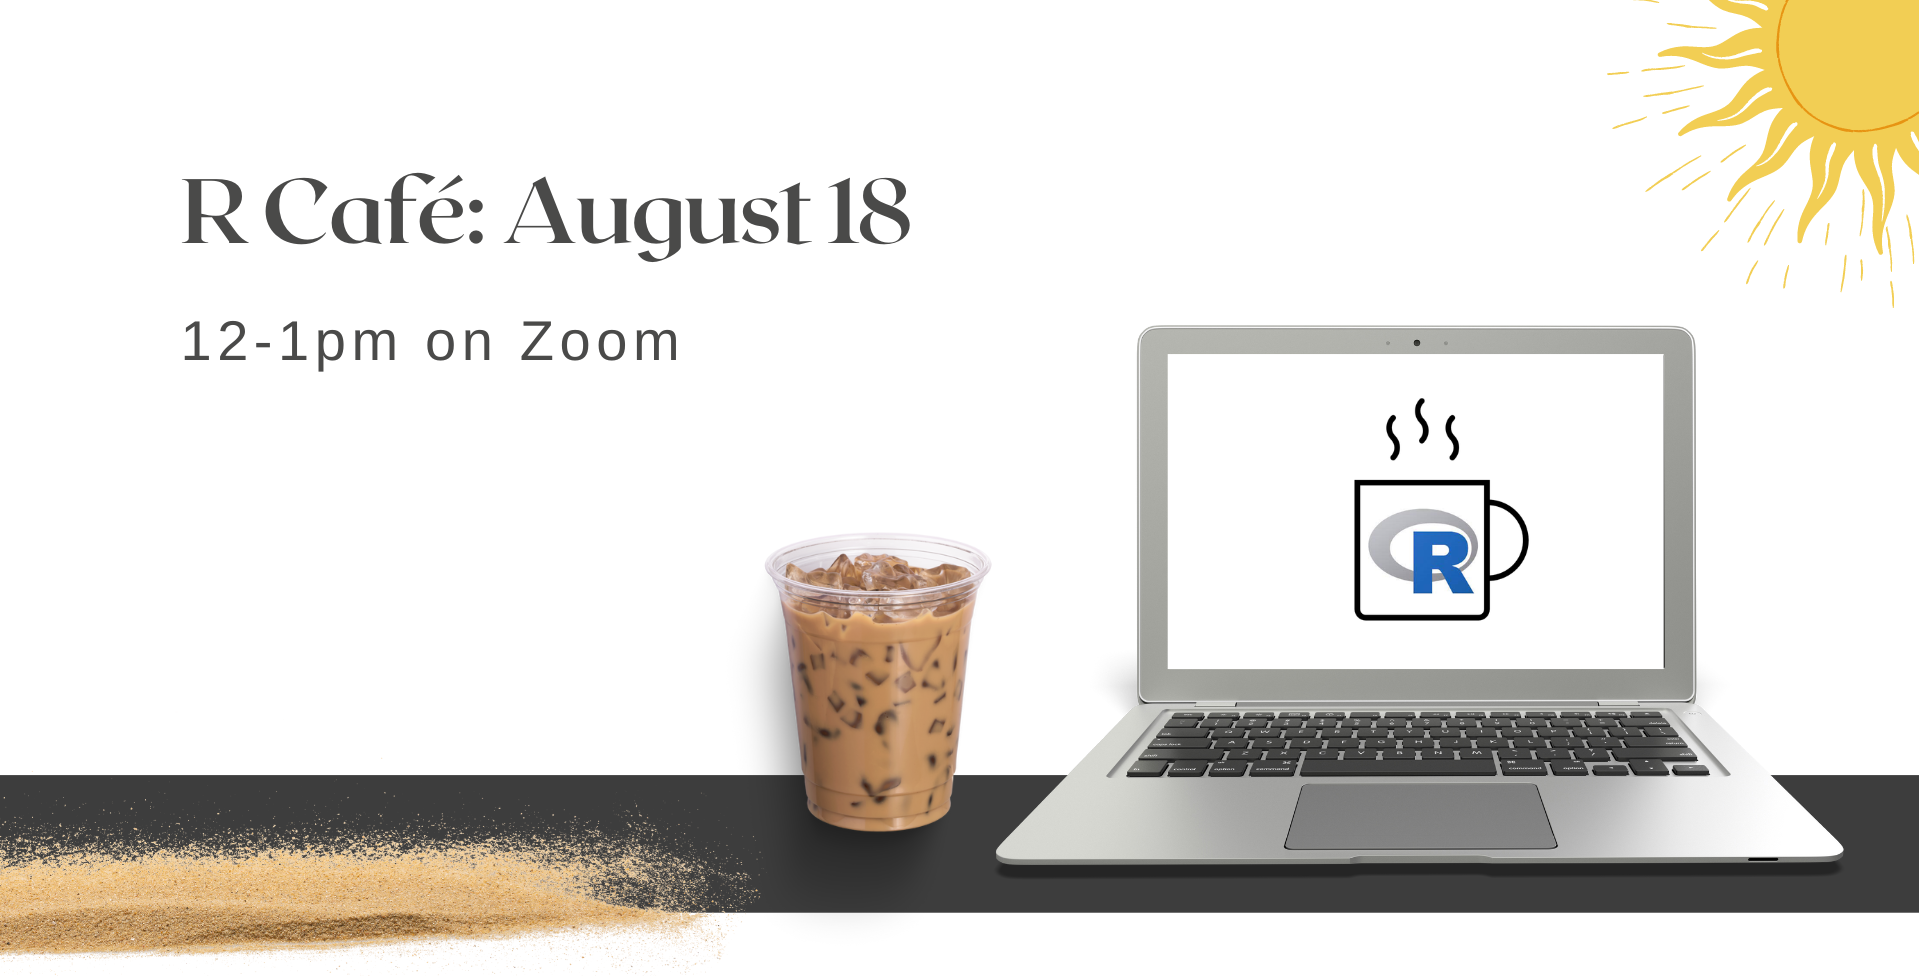 Laptop with R Café logo, iced coffee, sand, and sun, and the text: R Café August18. 12 to 1 pm on Zoom.